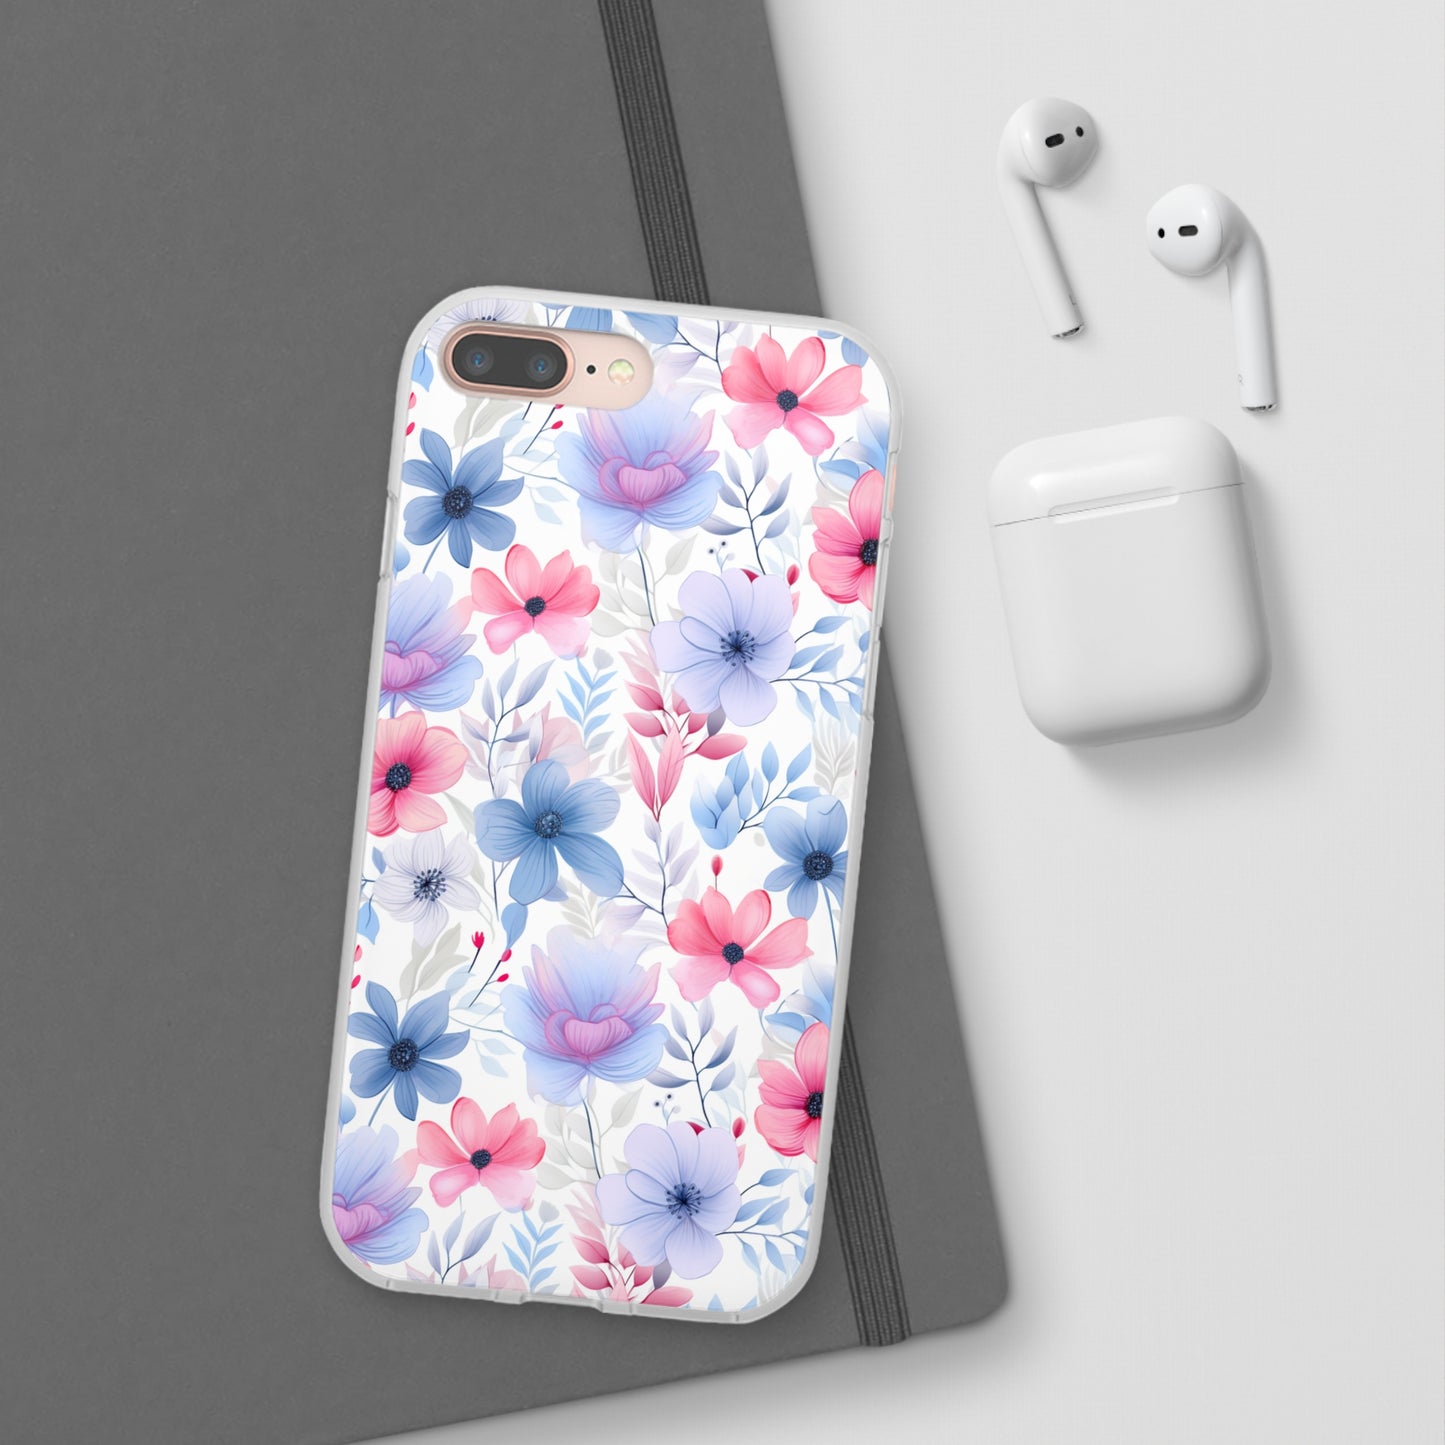 Floral Whispers - Soft Hues of Violets, Pinks, and Blues - Flexi Phone Case Phone Case Pattern Symphony iPhone 8 Plus with gift packaging  